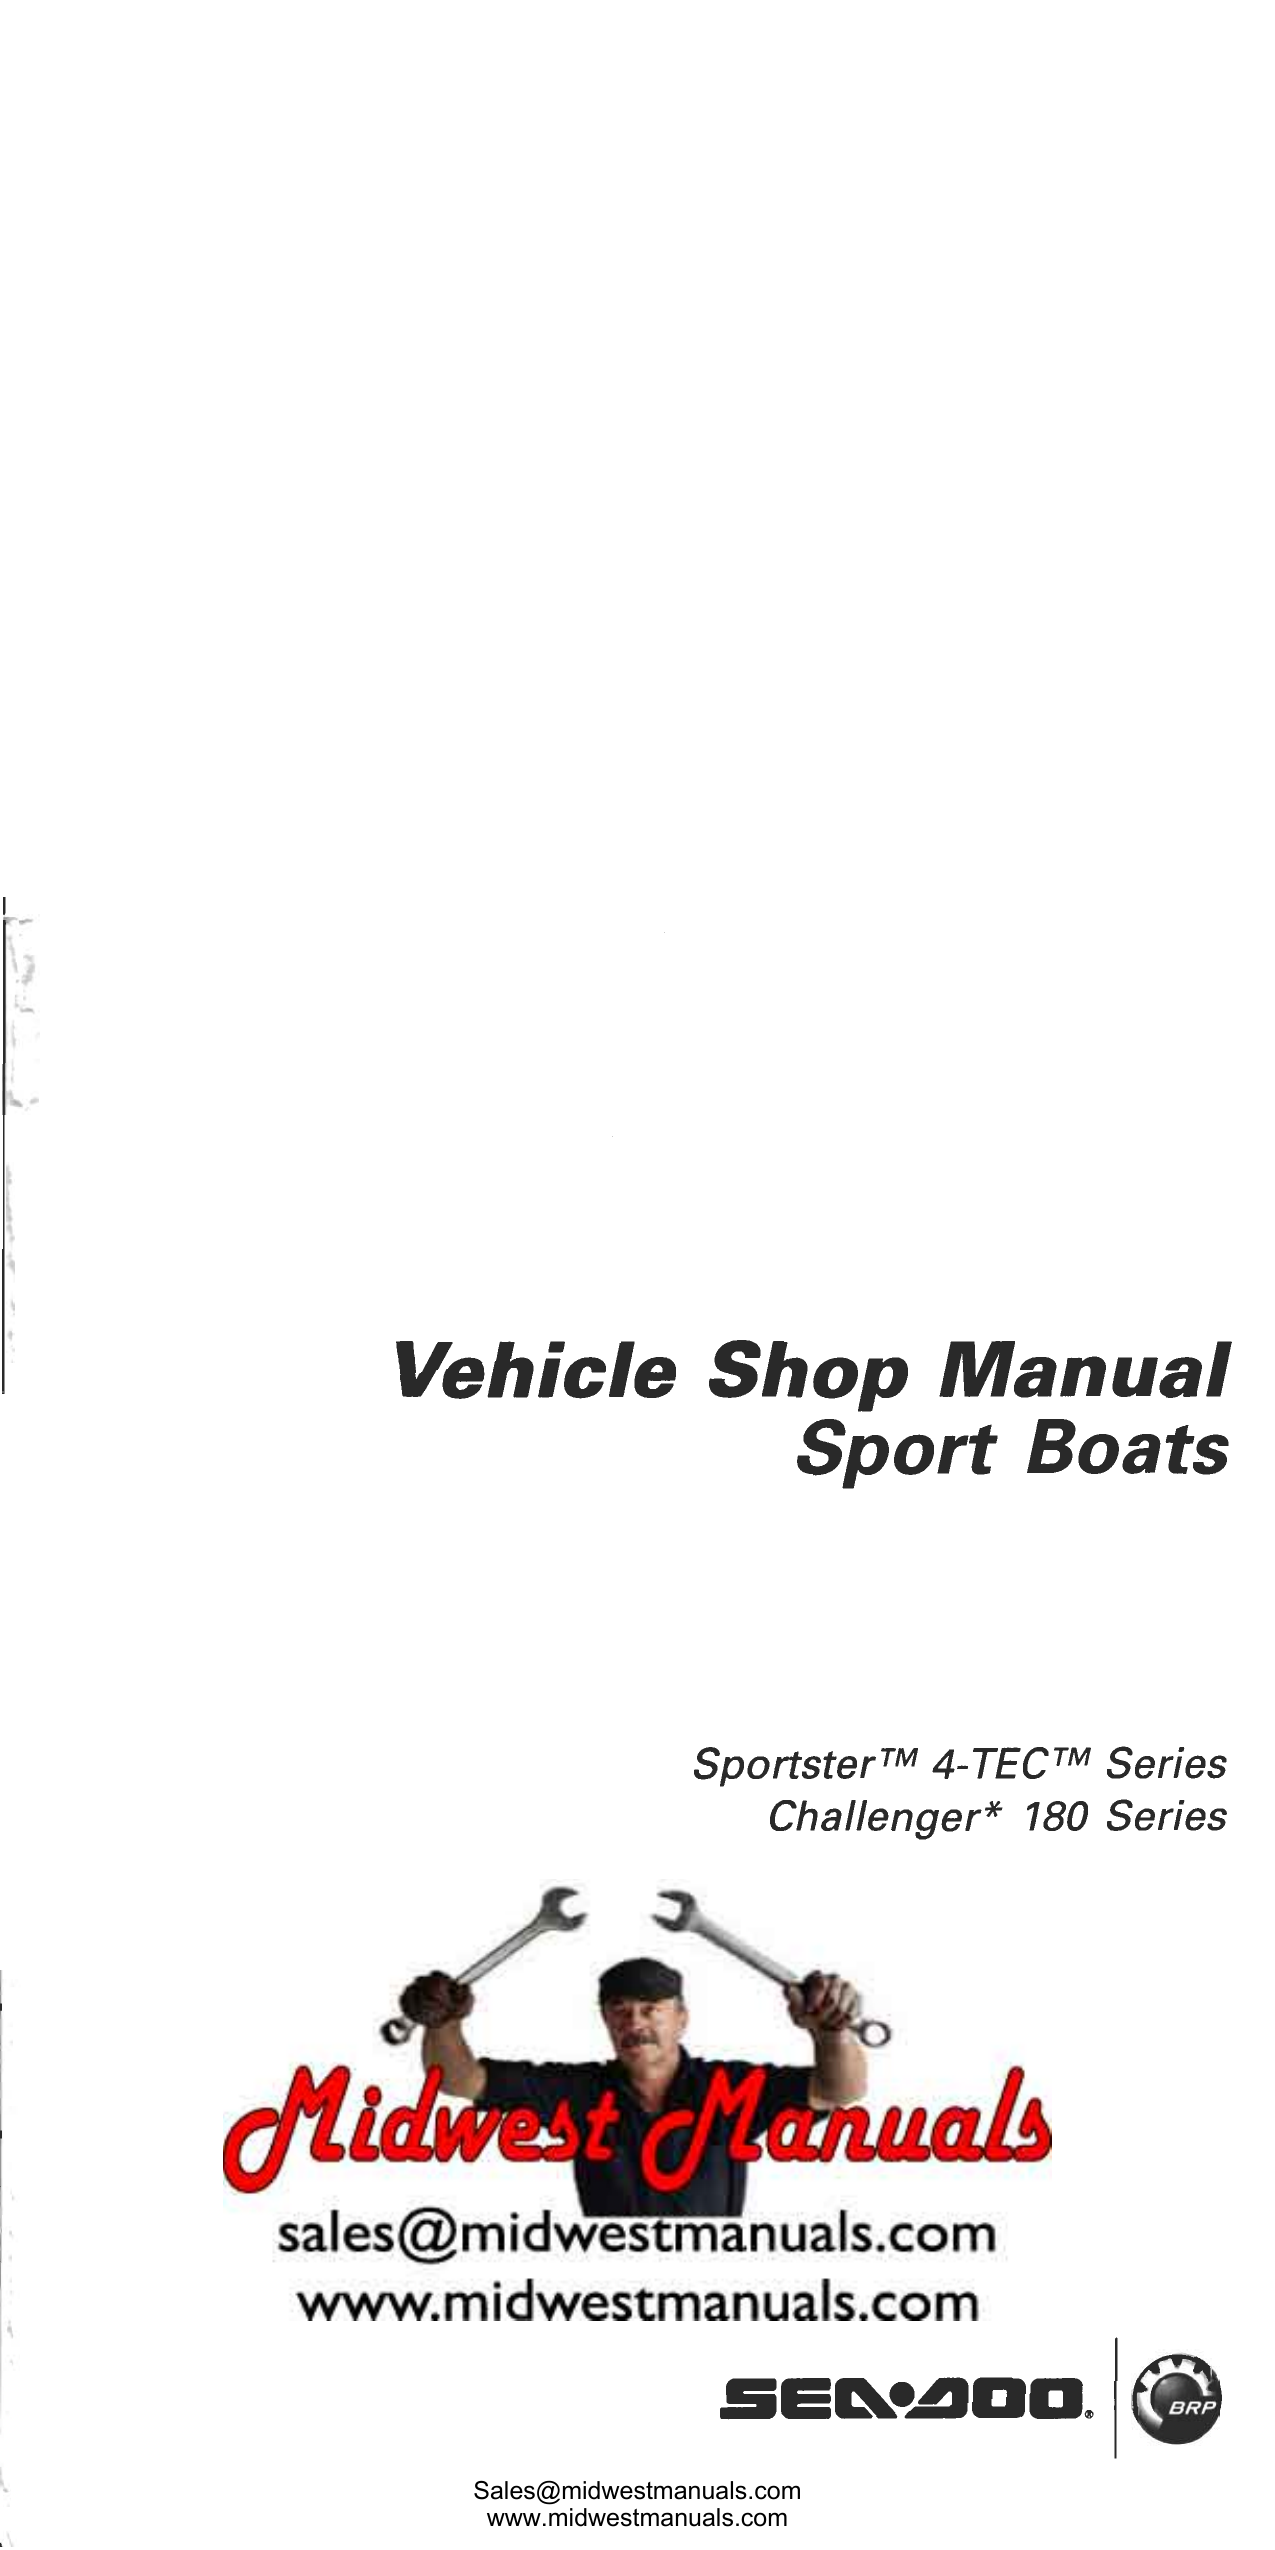 2006 Bombardier Sea-Doo Challenger 180 series /Sportster 180 4-Tec series service manual Preview image 2